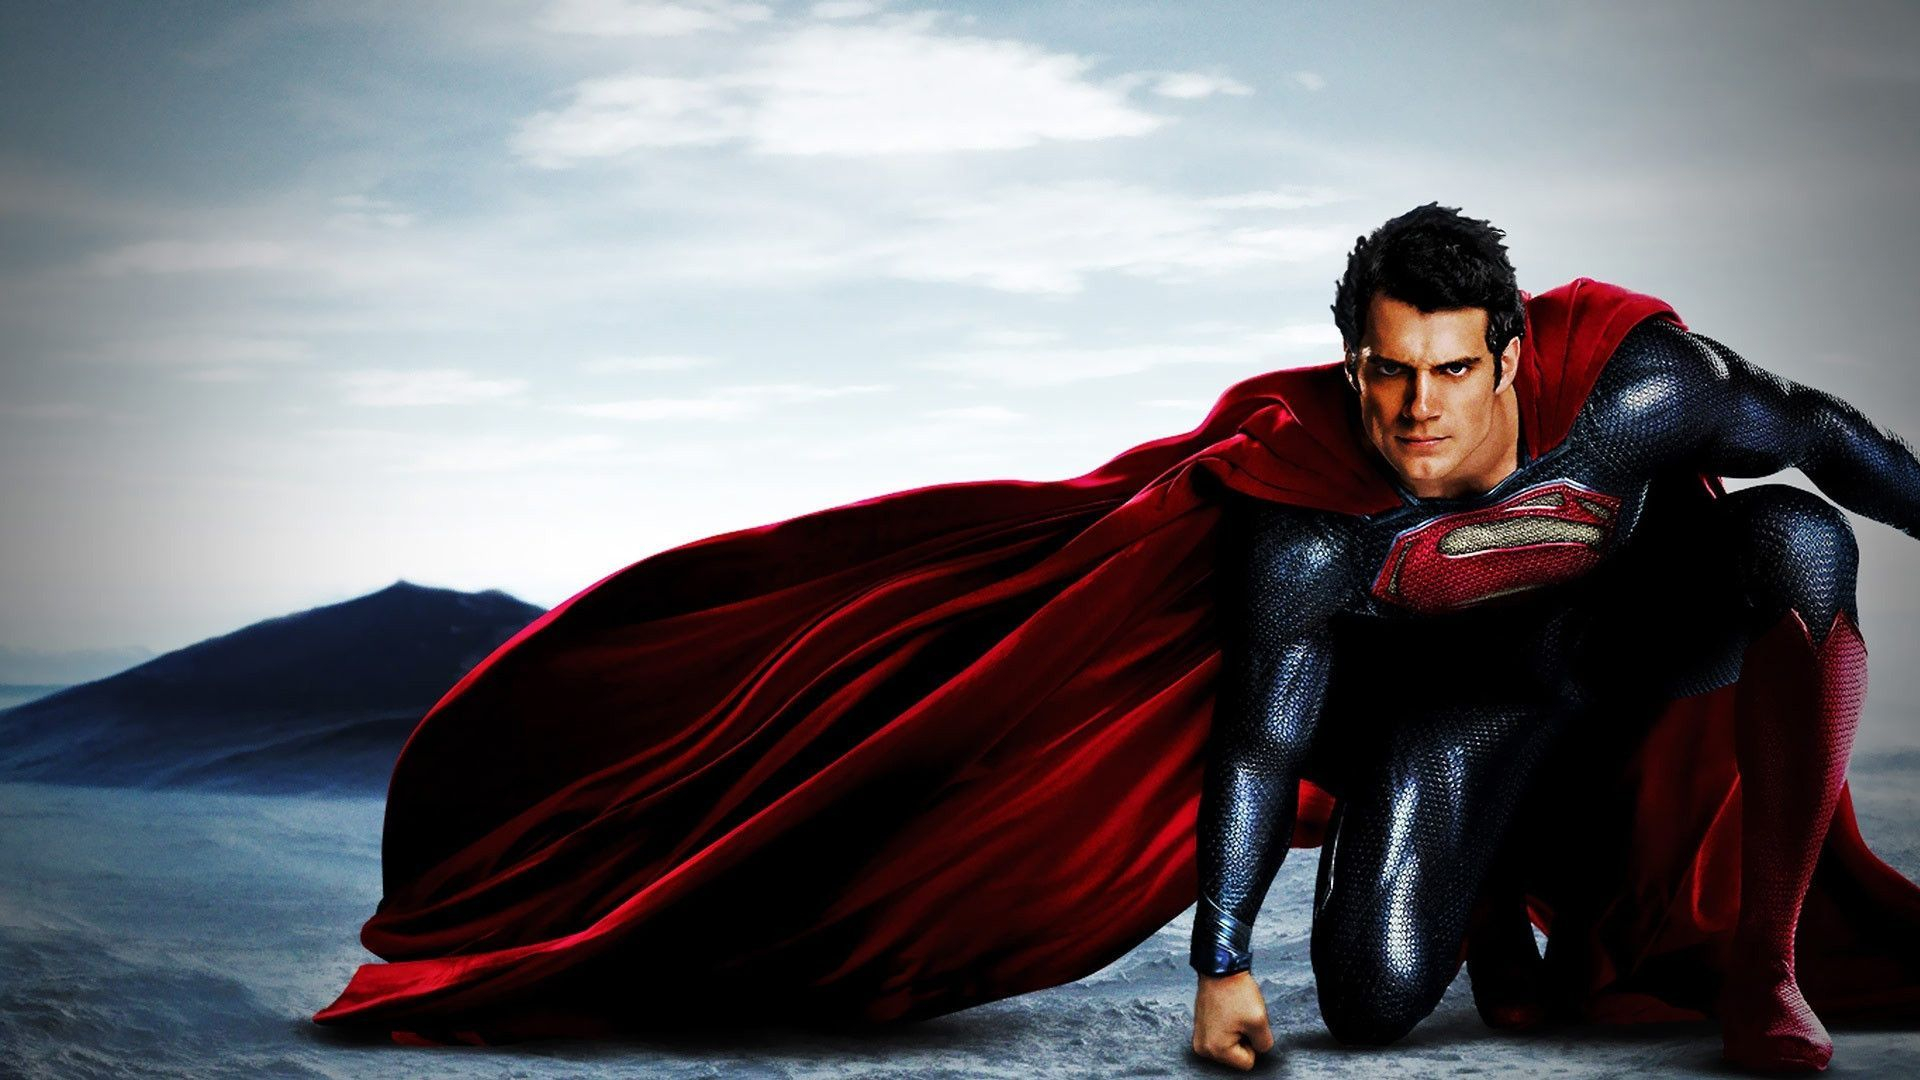 1920x1080 Superman Movie Wallpapers Top Free Superman Movie Backgrounds